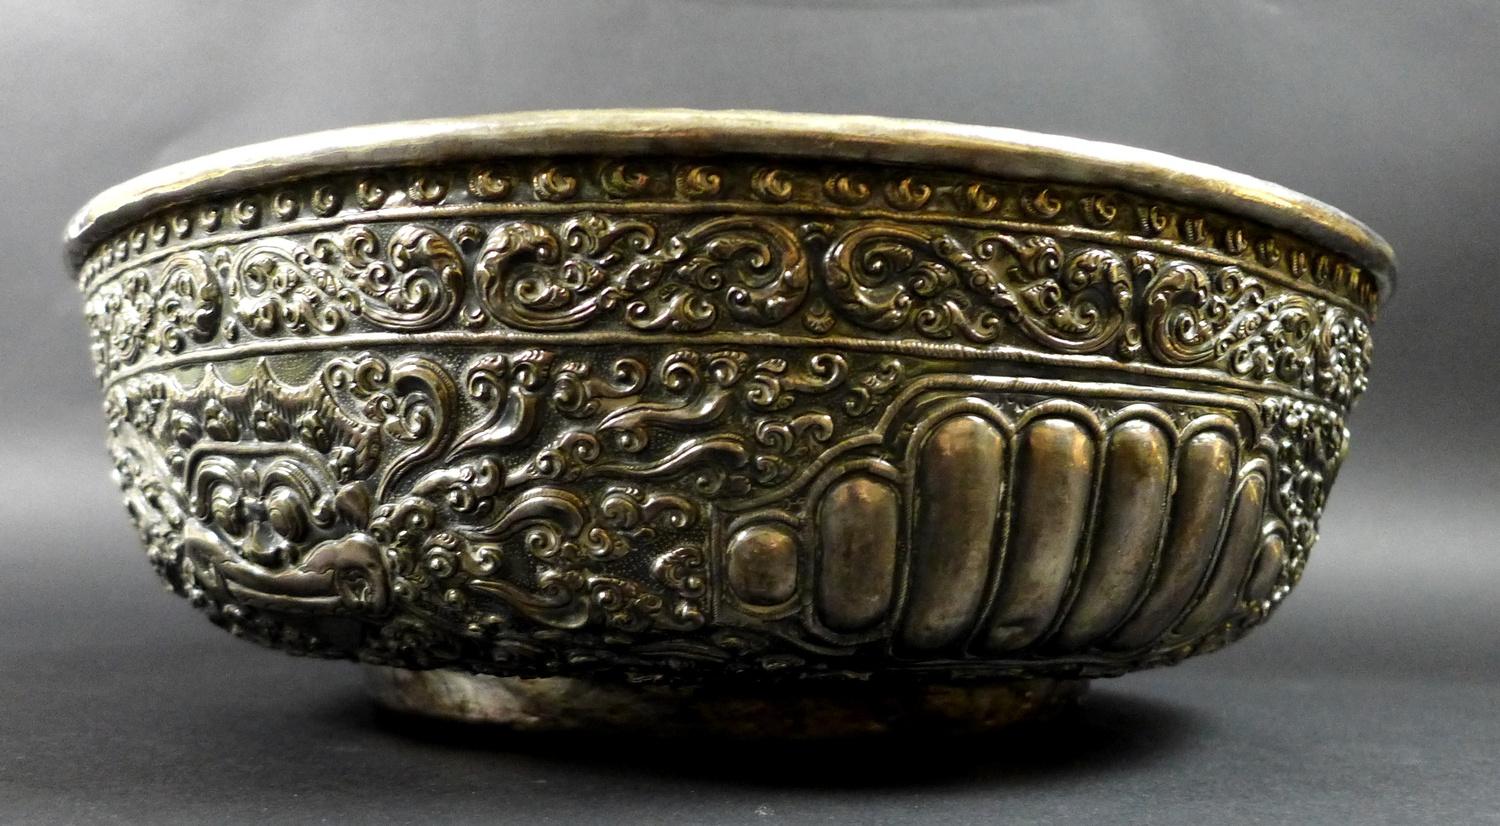 A late 19th century Thai silver large bowl, repousse decorated in relief with three face masks and - Image 3 of 10